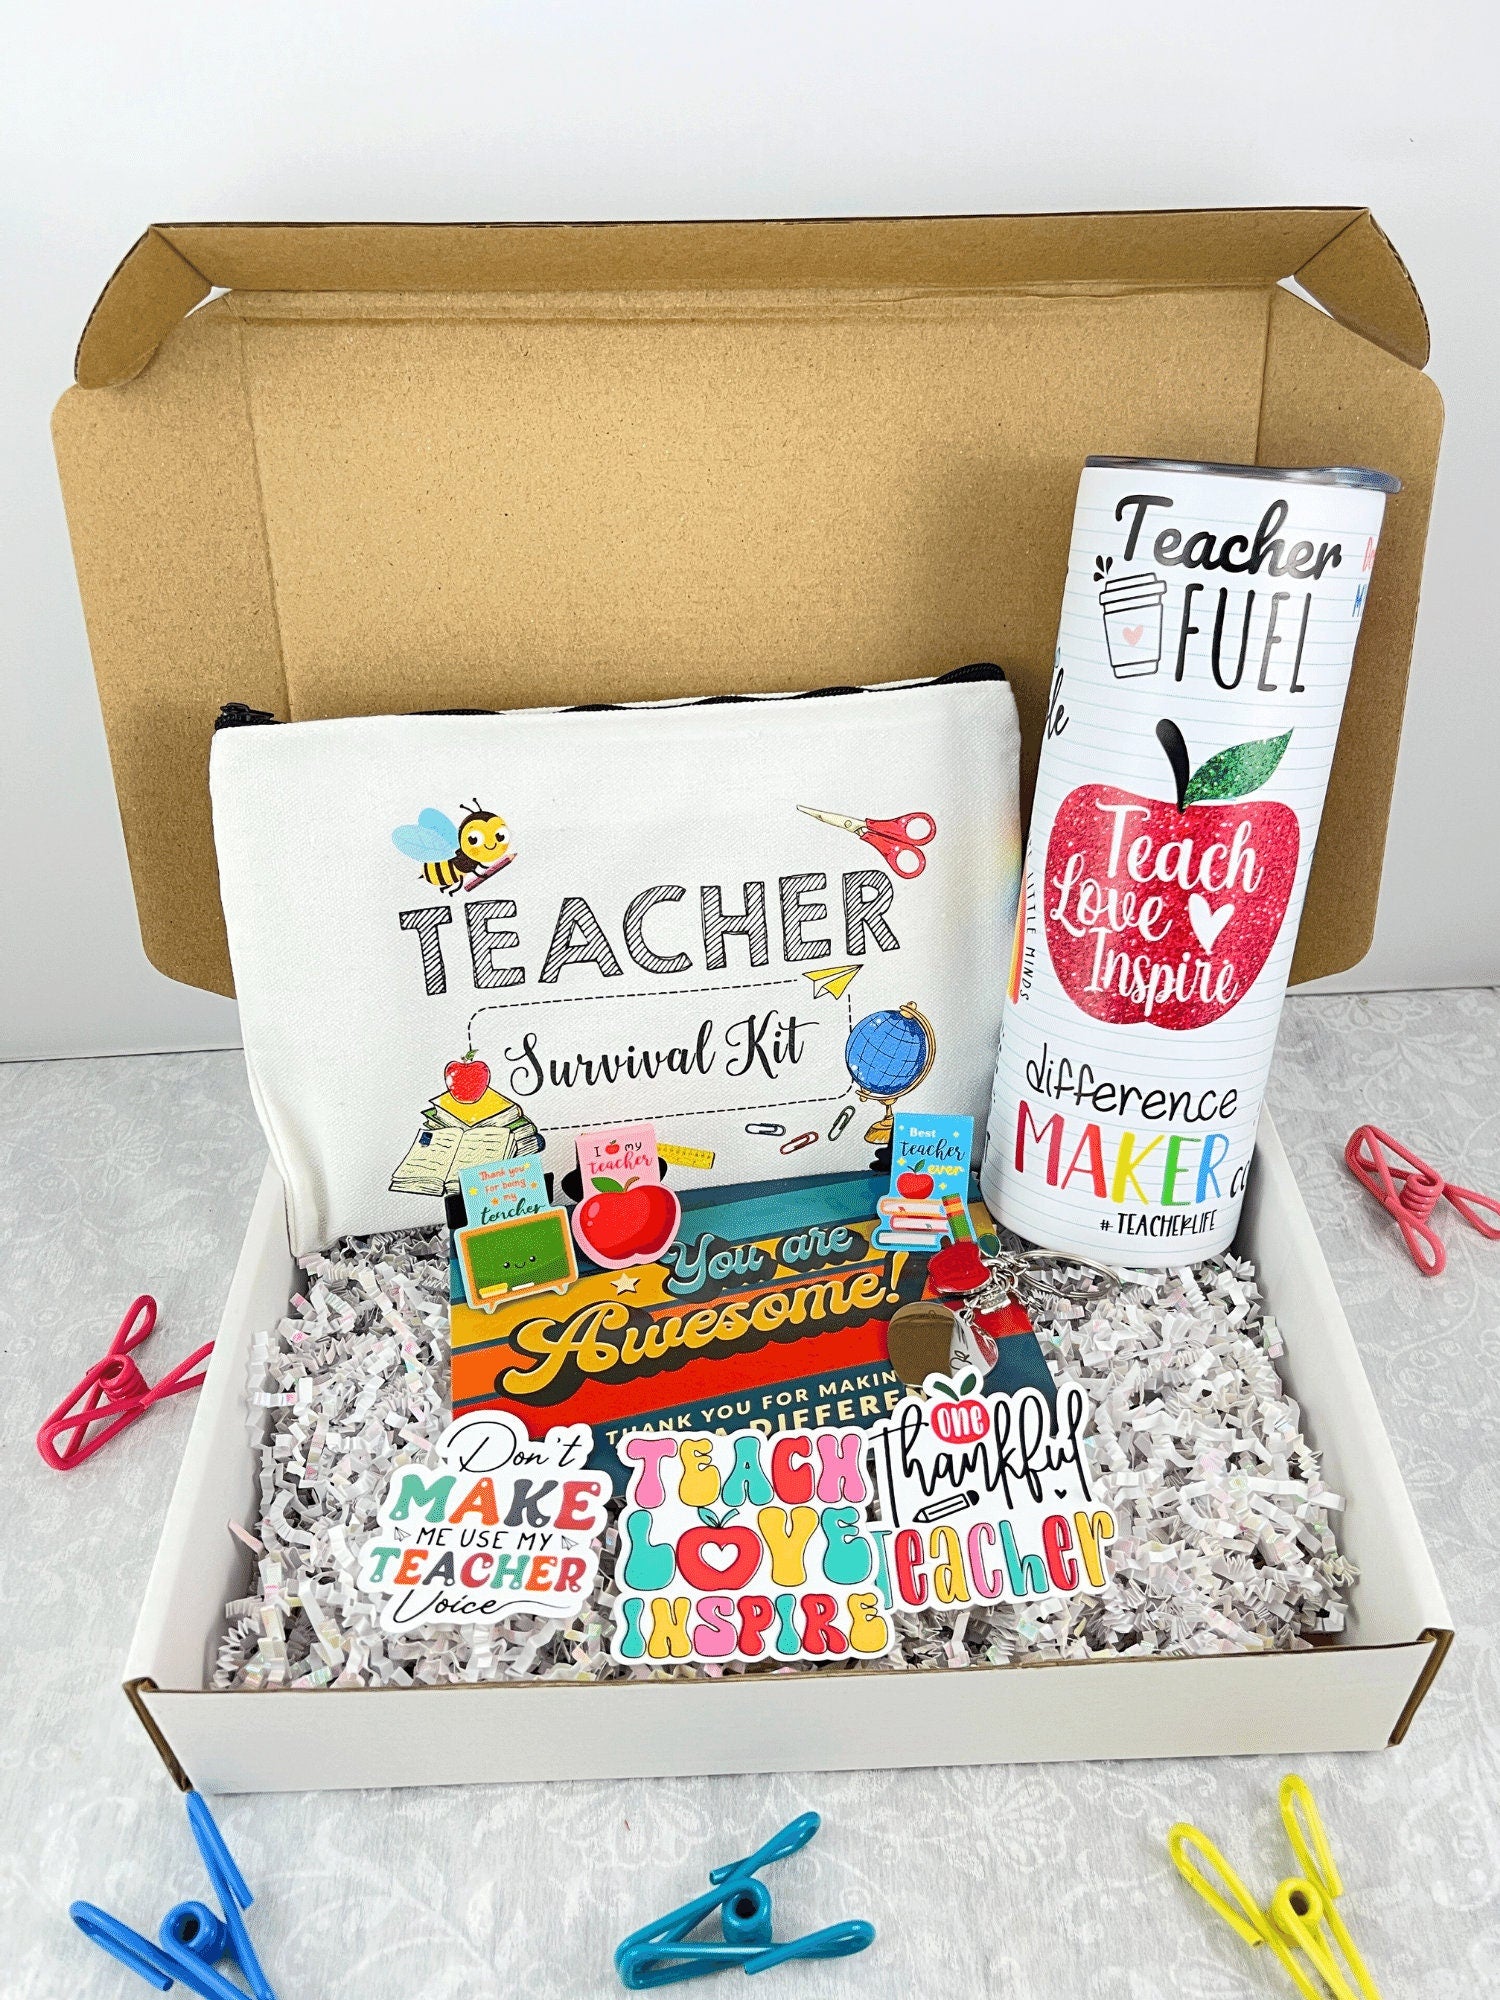 Teacher Appreciation Day Gift Ideas Using Recycled Jars - Laura Kelly's  Inklings